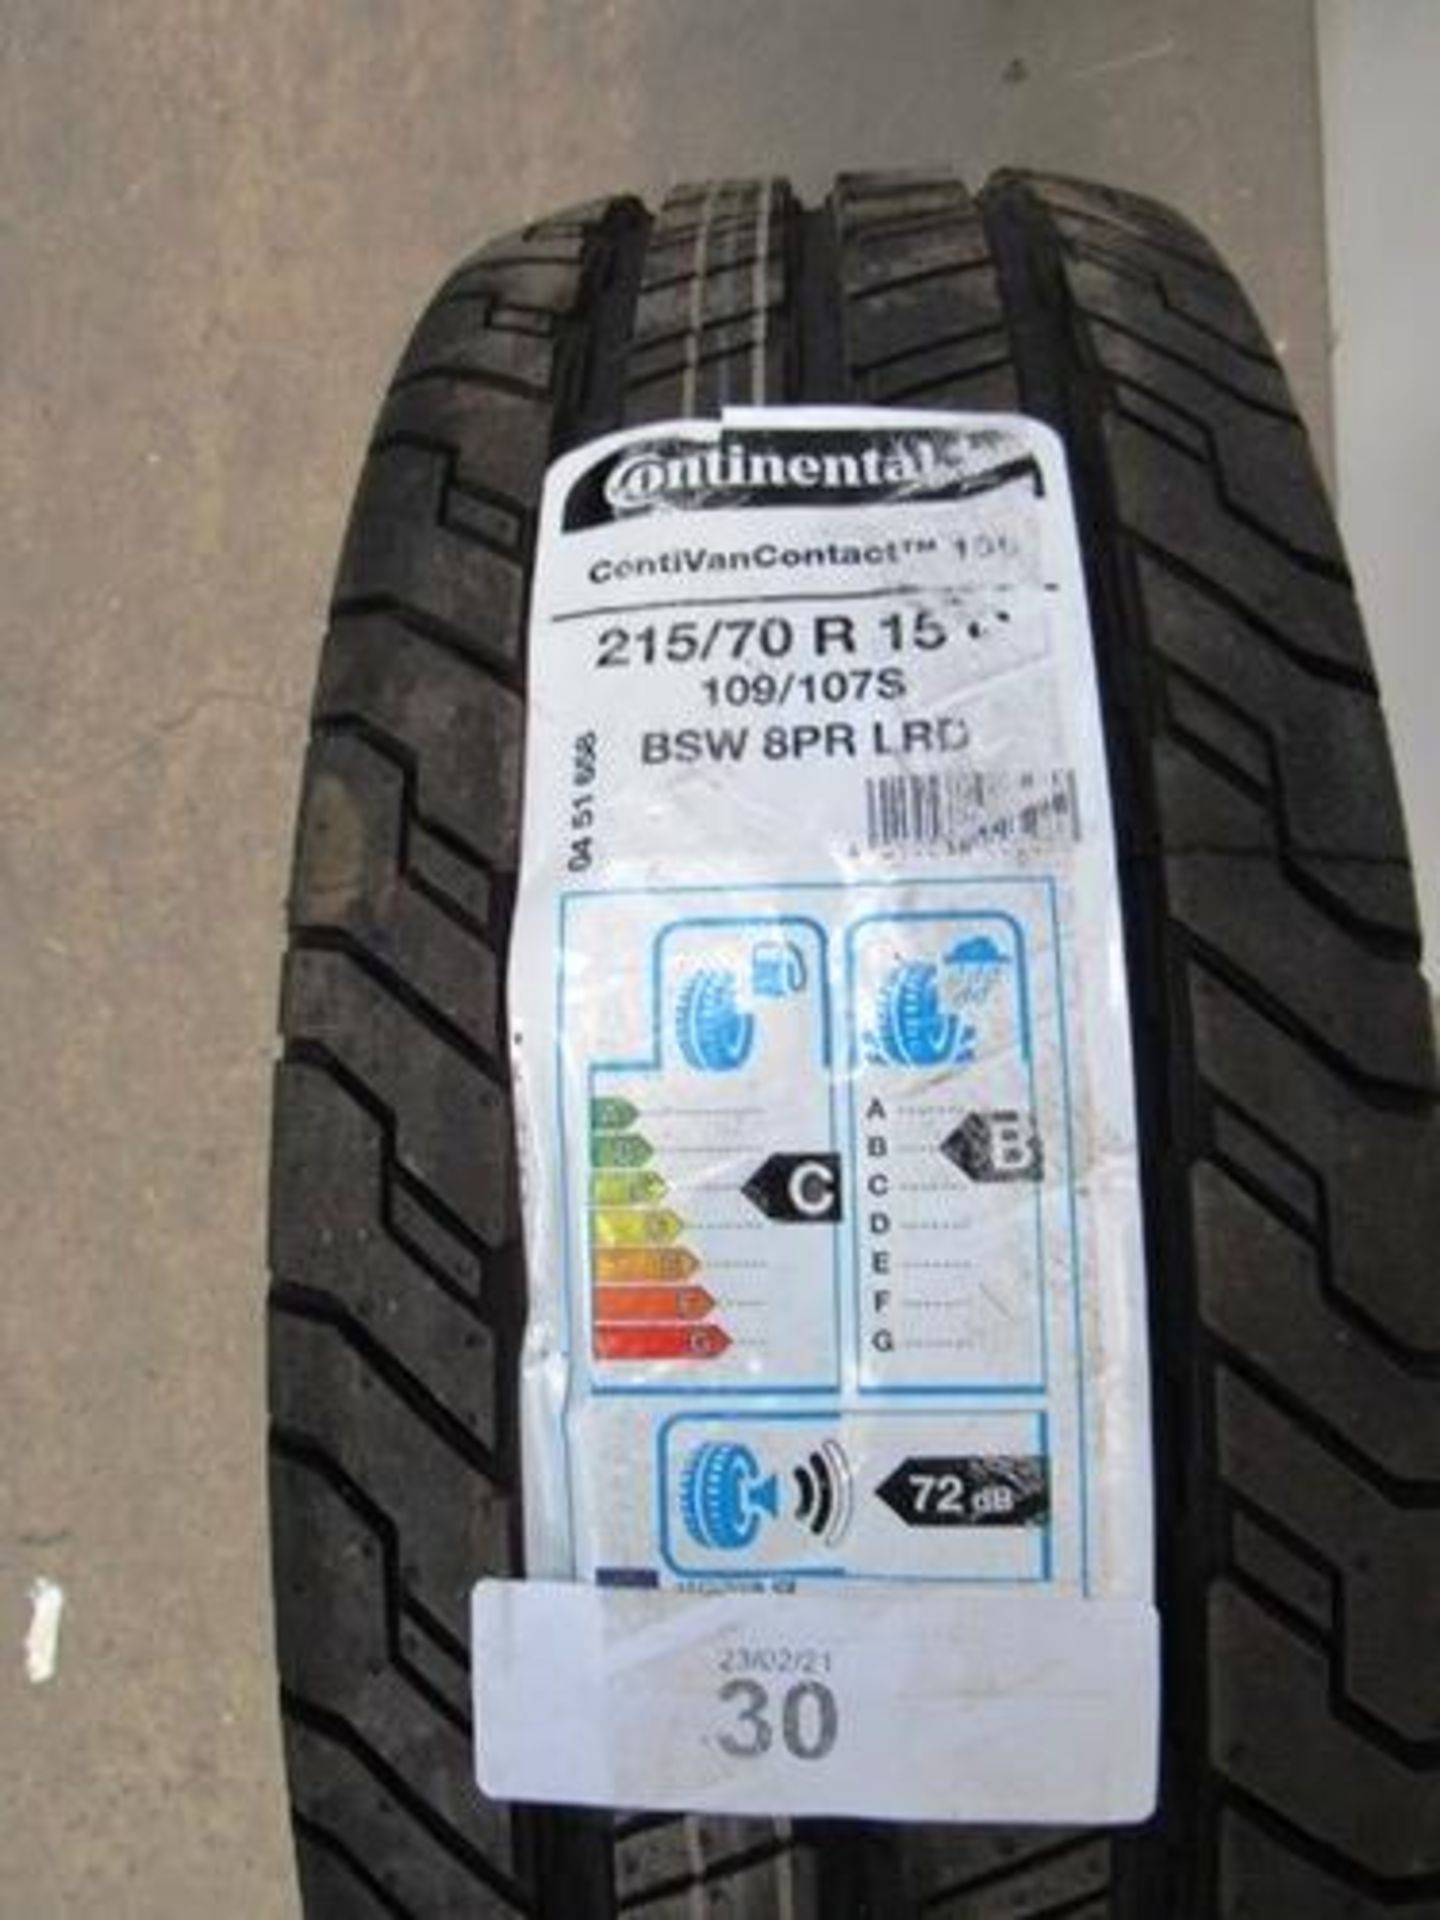 1 x Continental Contivan Contact TM100 BSW 8PR LRD tyre, size 215/70R15C - New with label (GS2)